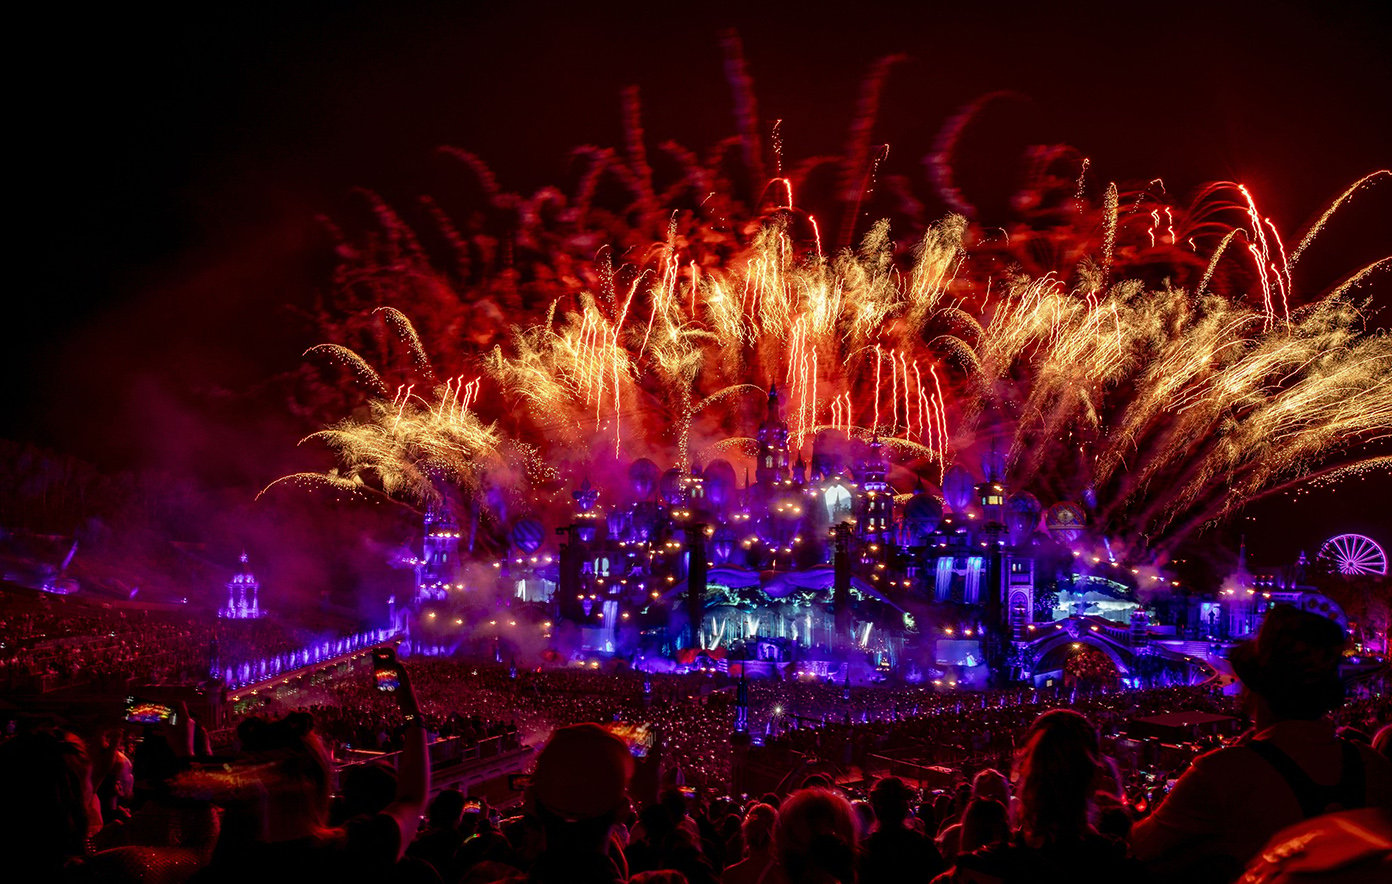 Tomorrowland is offering DJ sets to aspiring young DJs under 18